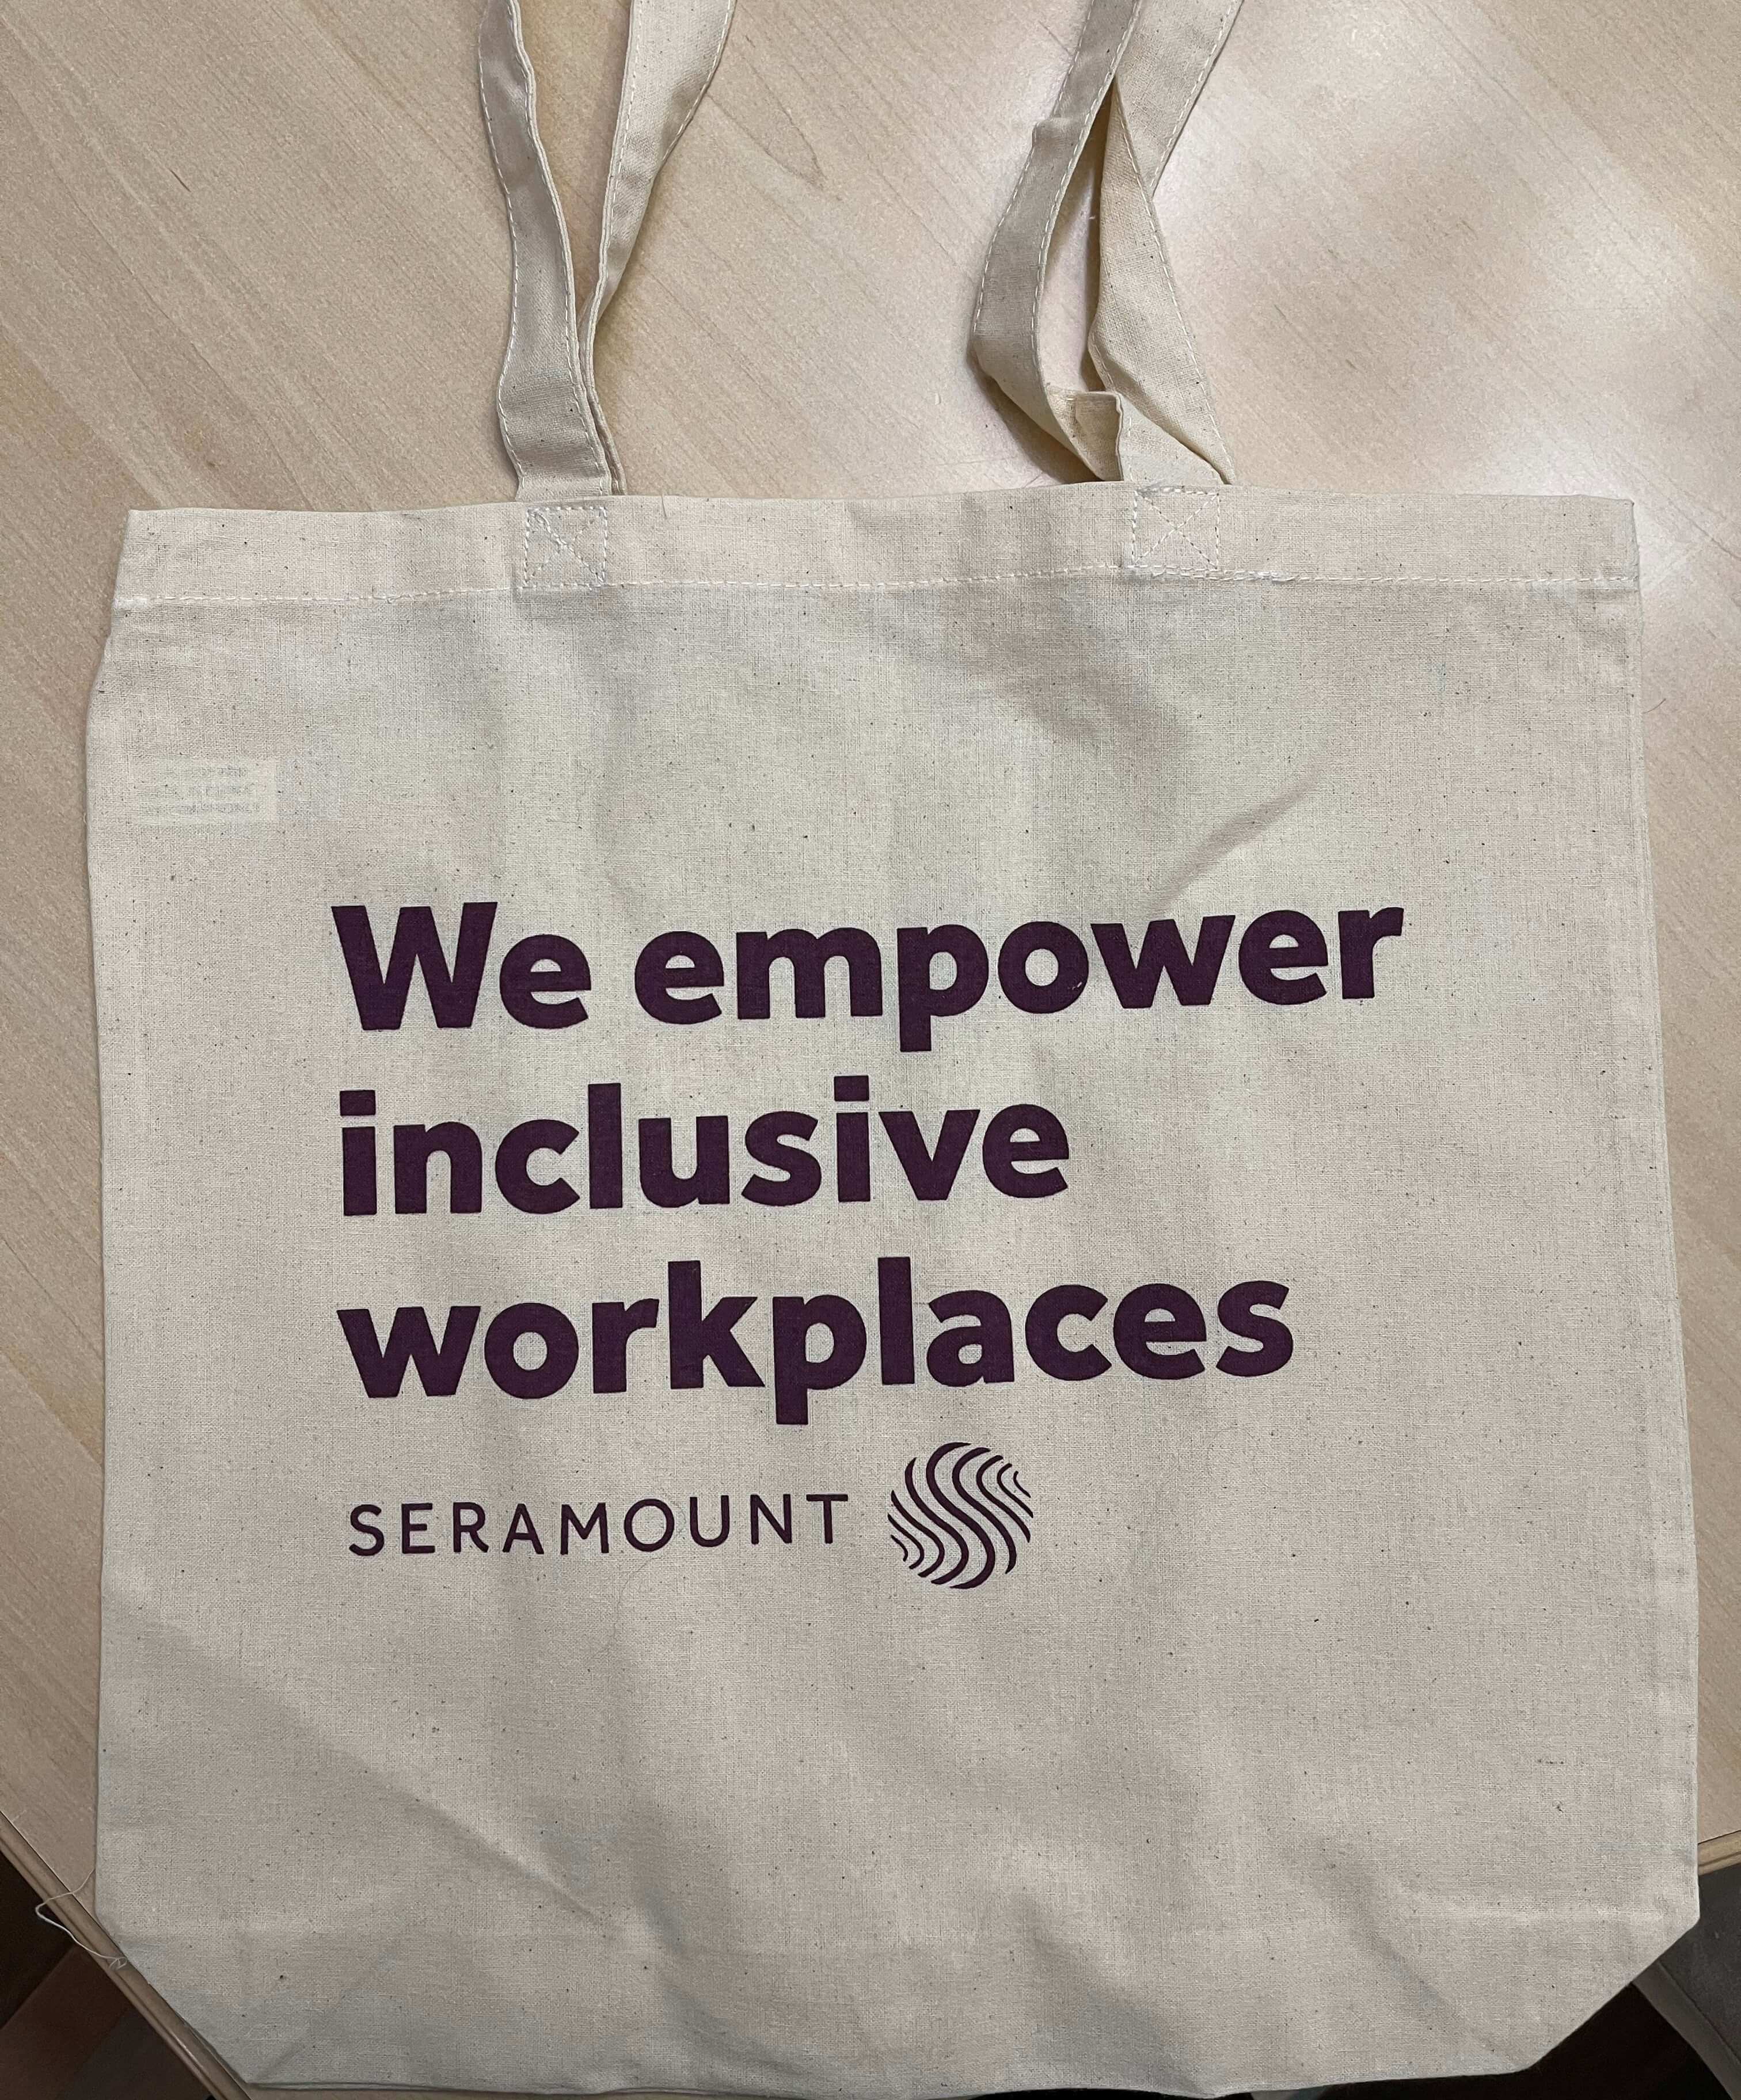 Dress up your presentation! This simple tote bag was mailed out to employees when Working Mother Media Group changed its name to Seramount.